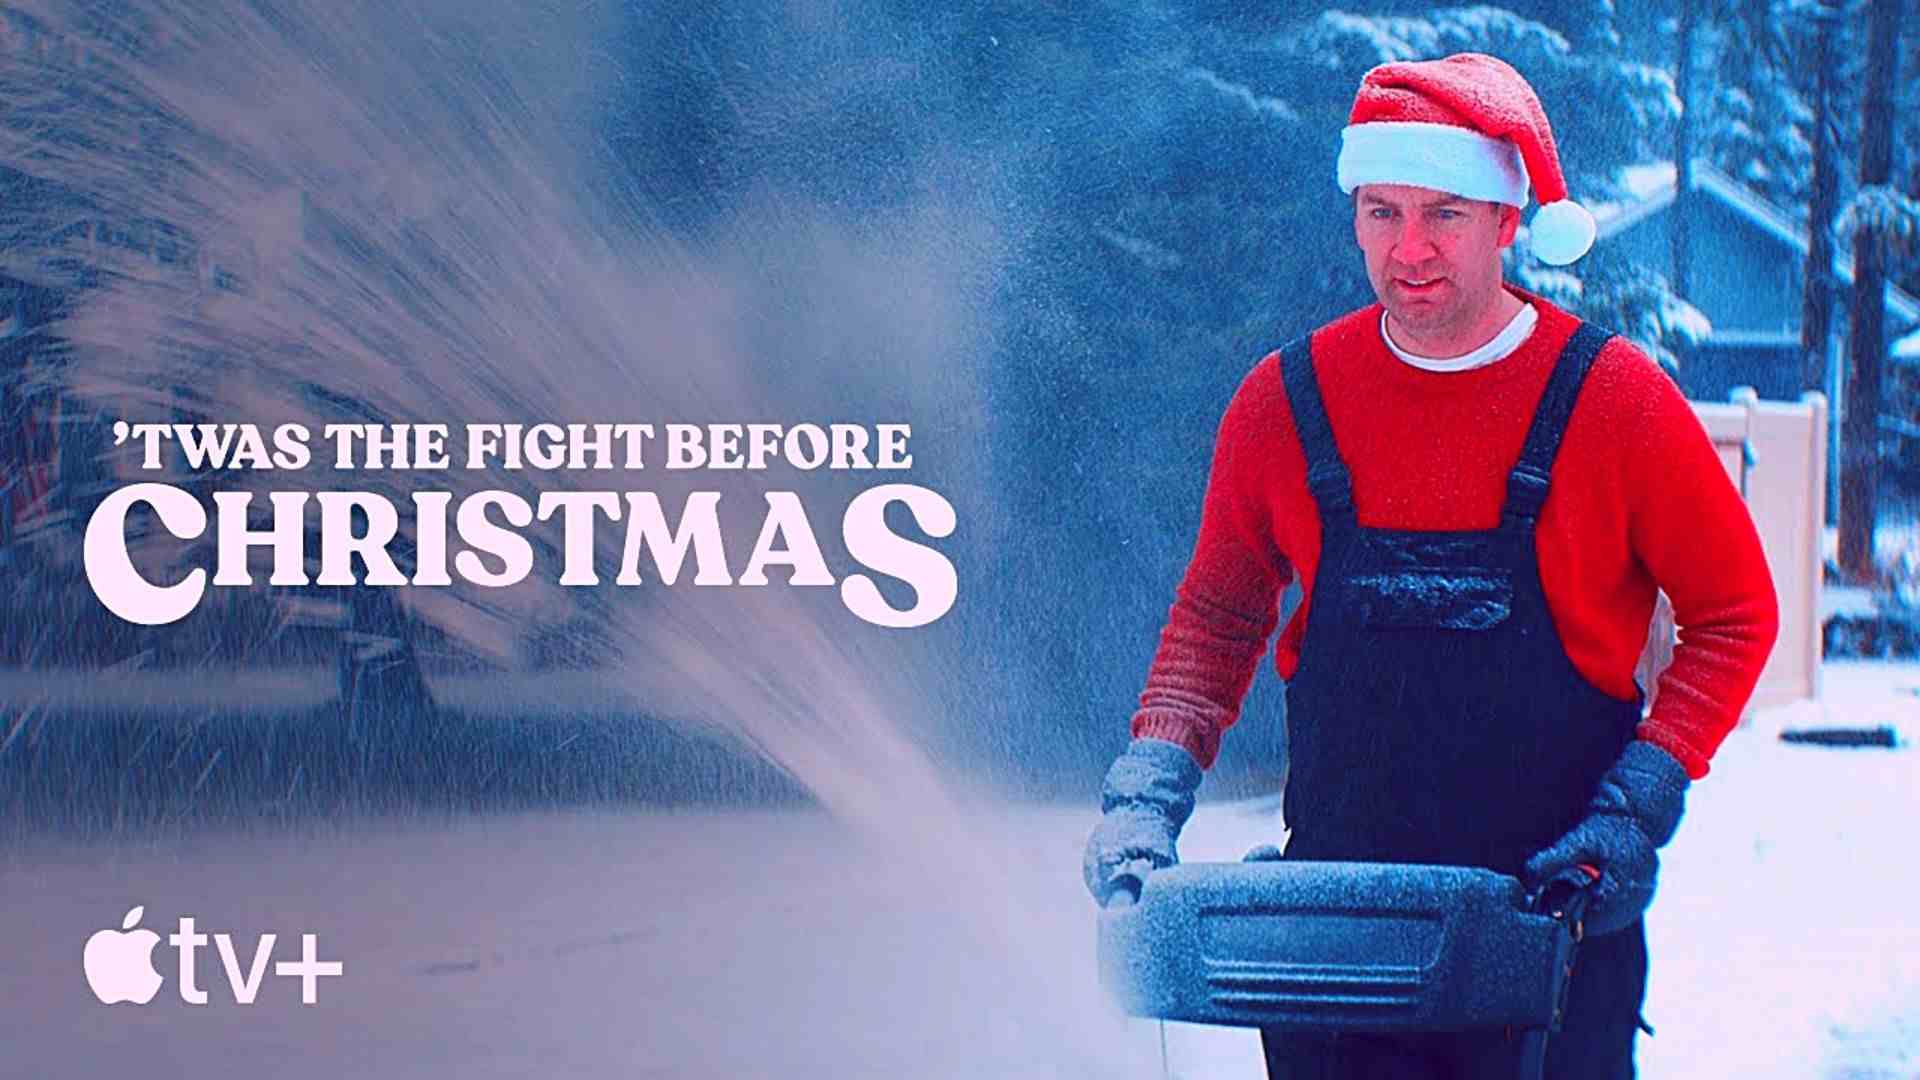 The Fight Before Christmas Parents Guide and Age Rating 2021